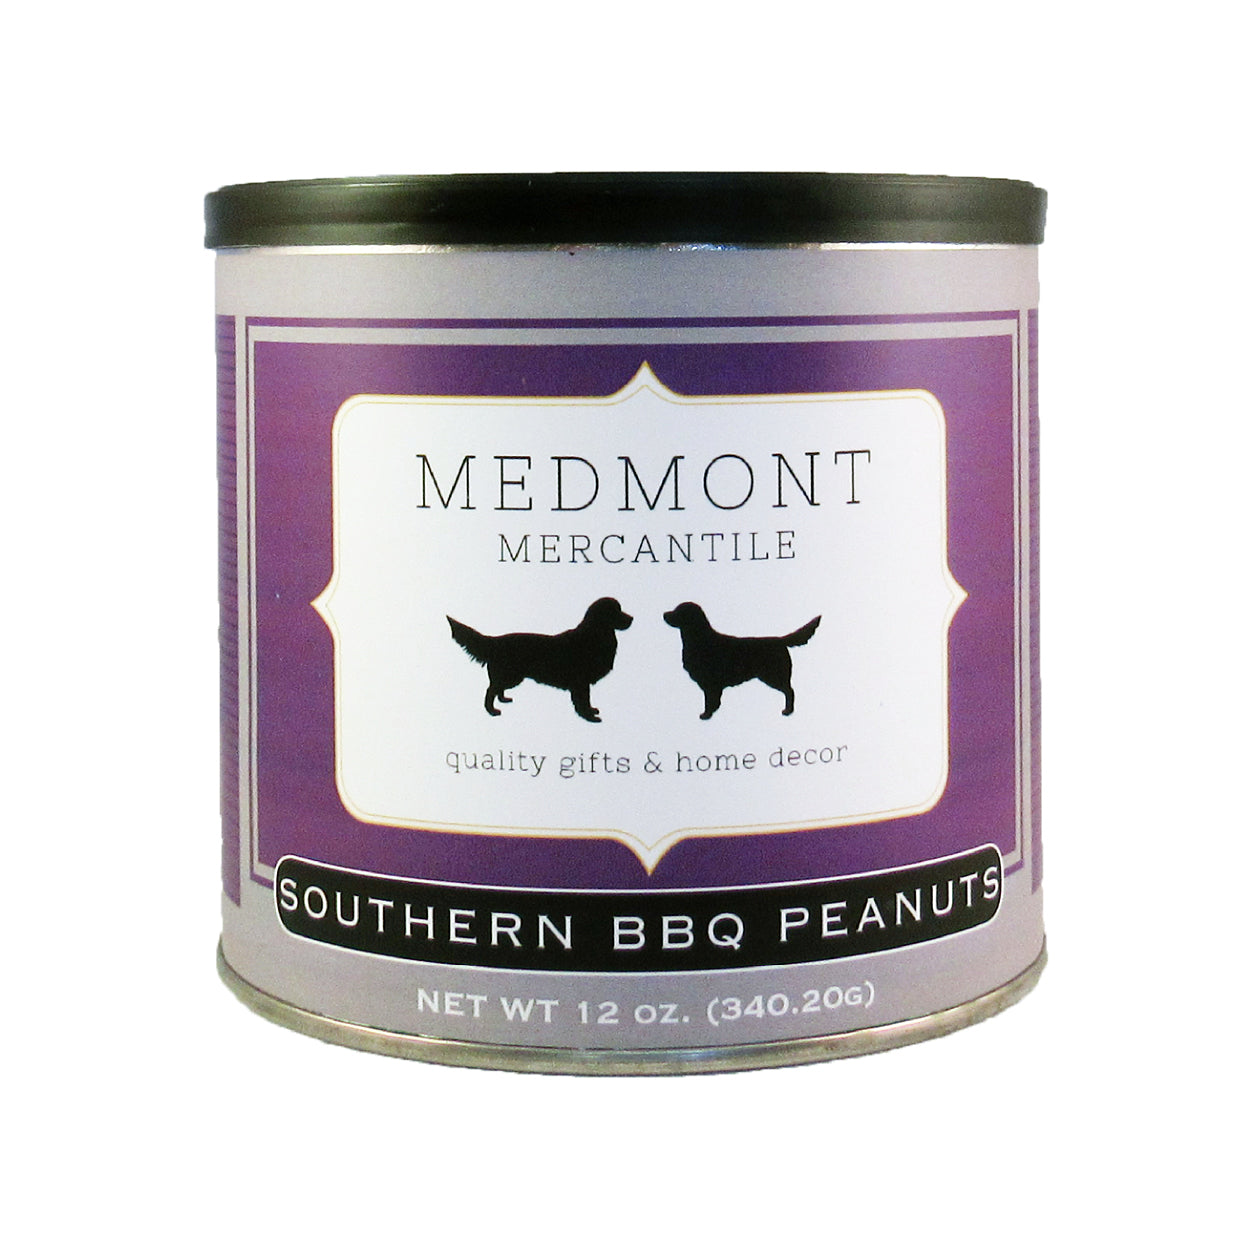 Medmont Mercantile Southern BBQ Peanuts